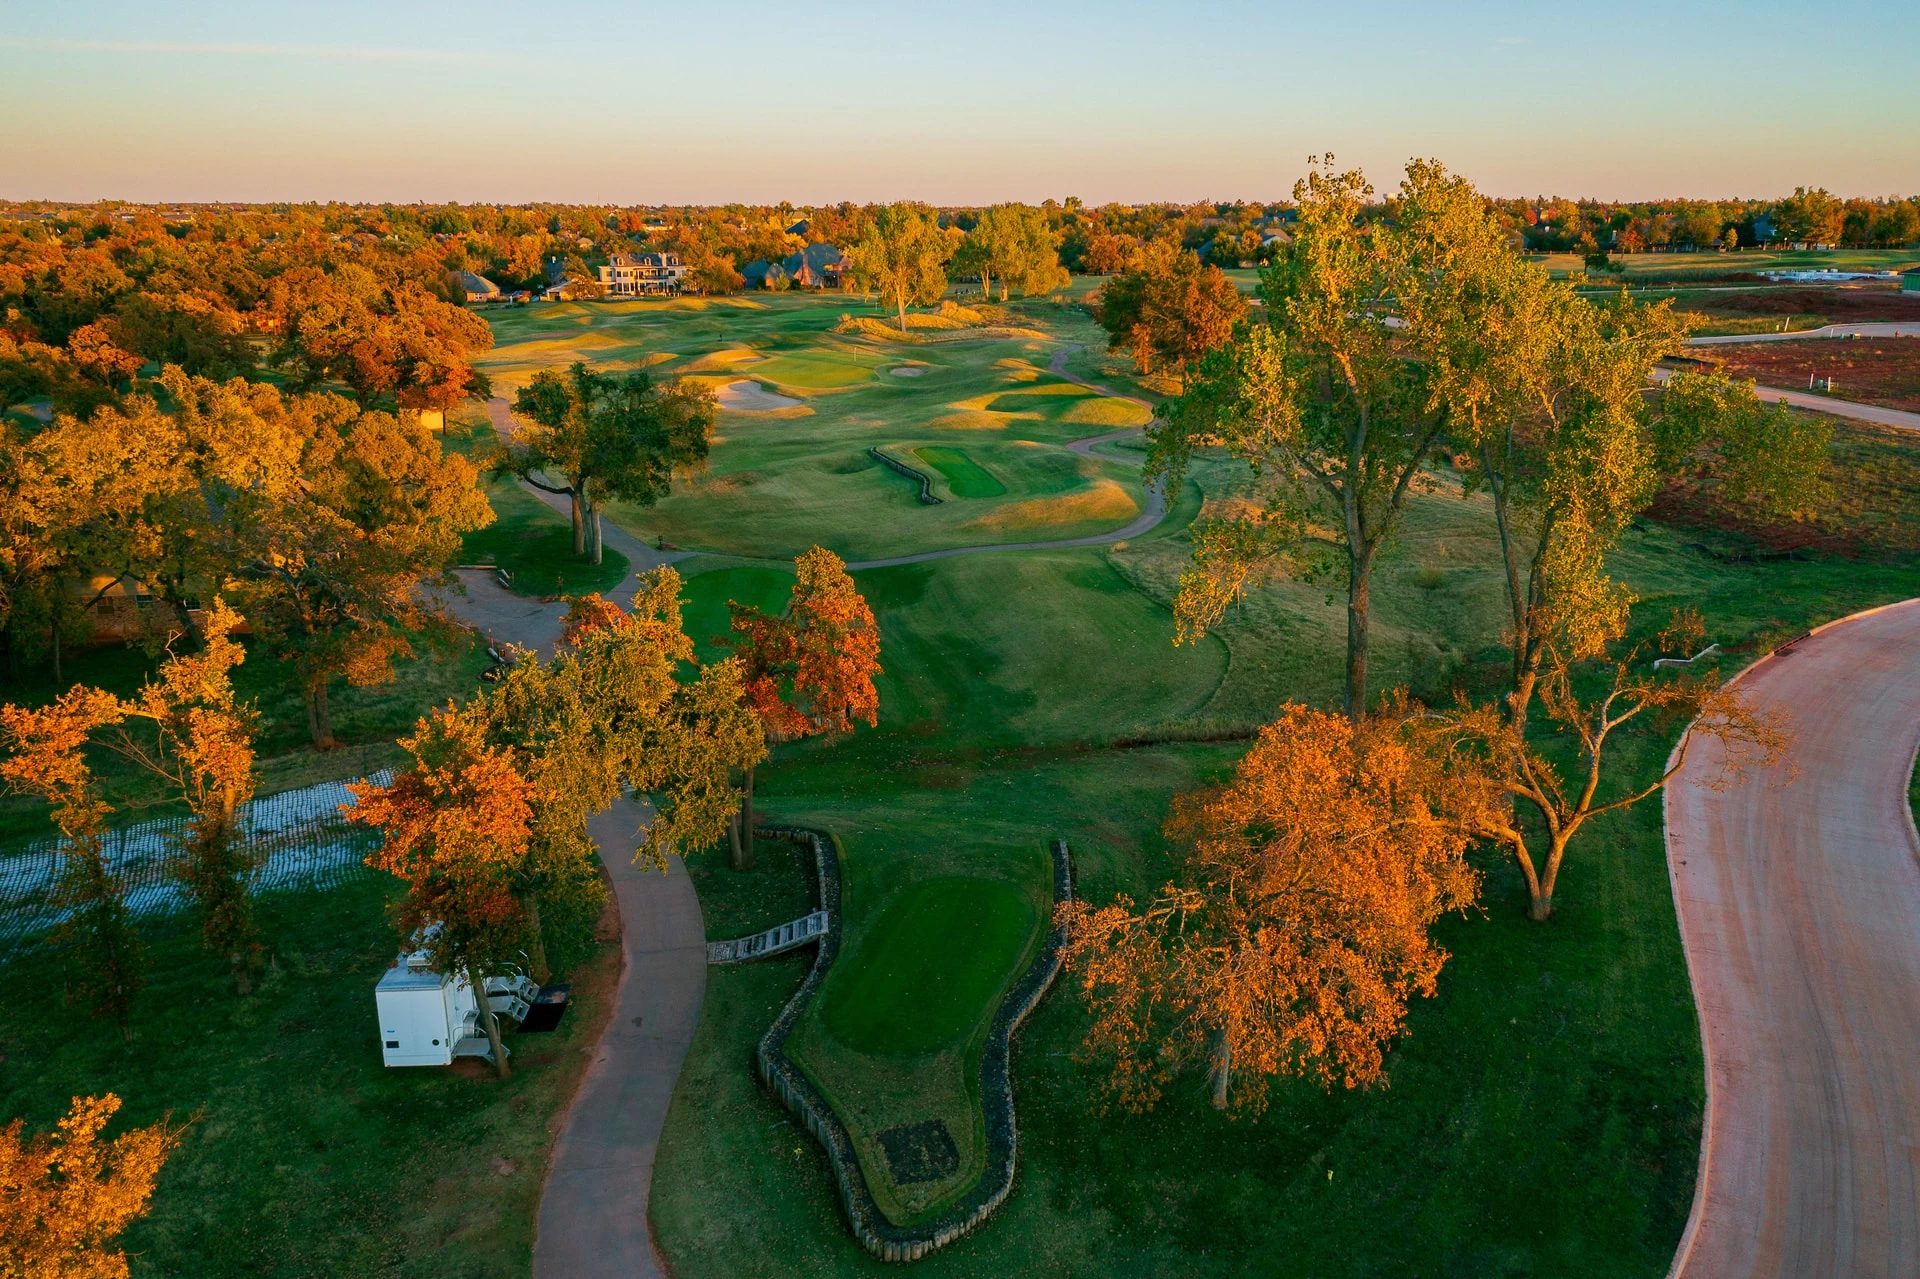 Drone image of the West Course at Oak Tree Country Club in Edmond, OK.